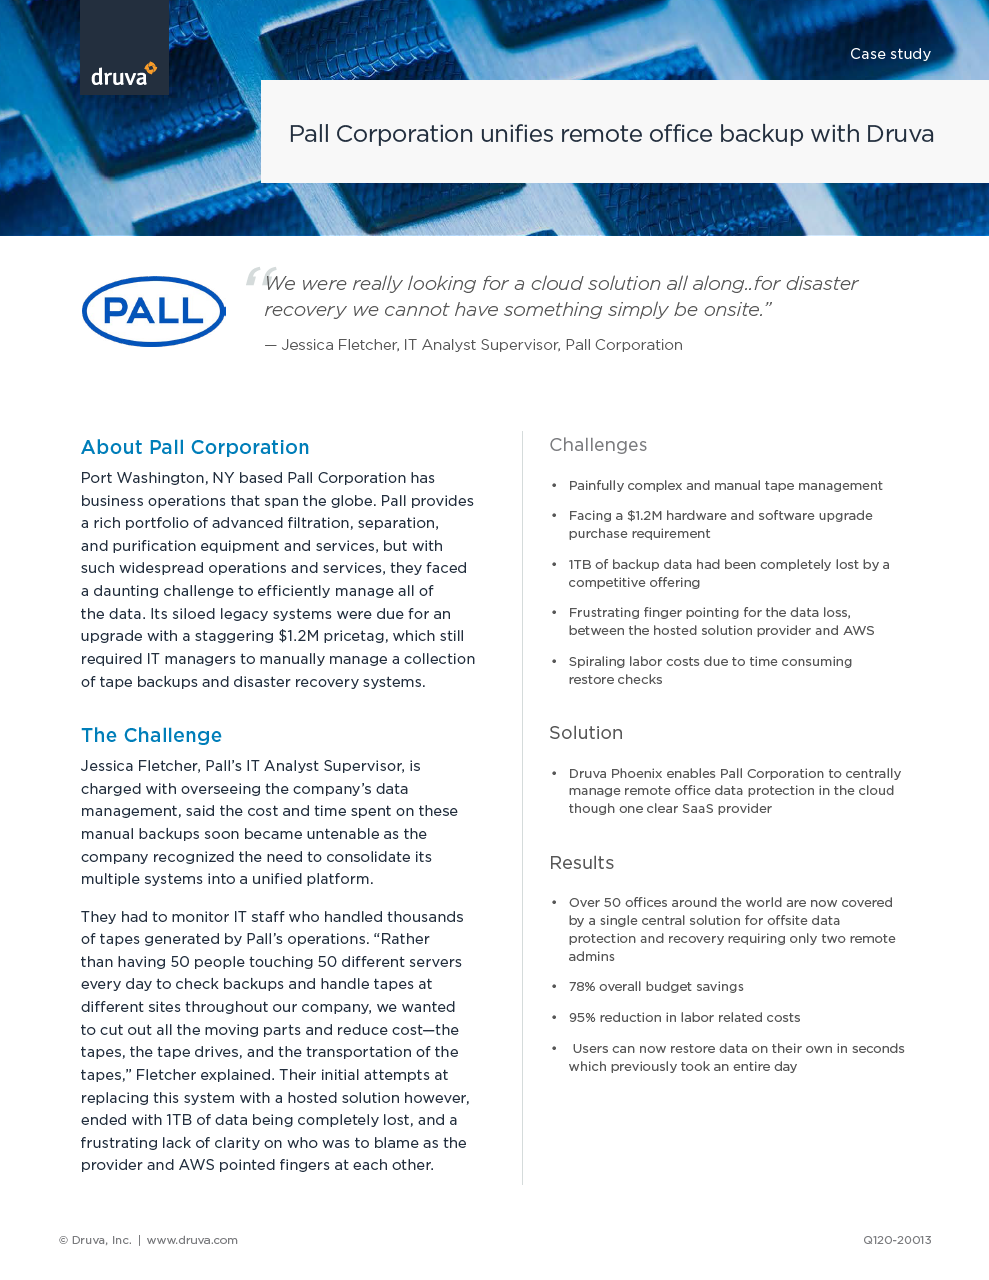 Pall Corporation unifies remote office backup with Druva